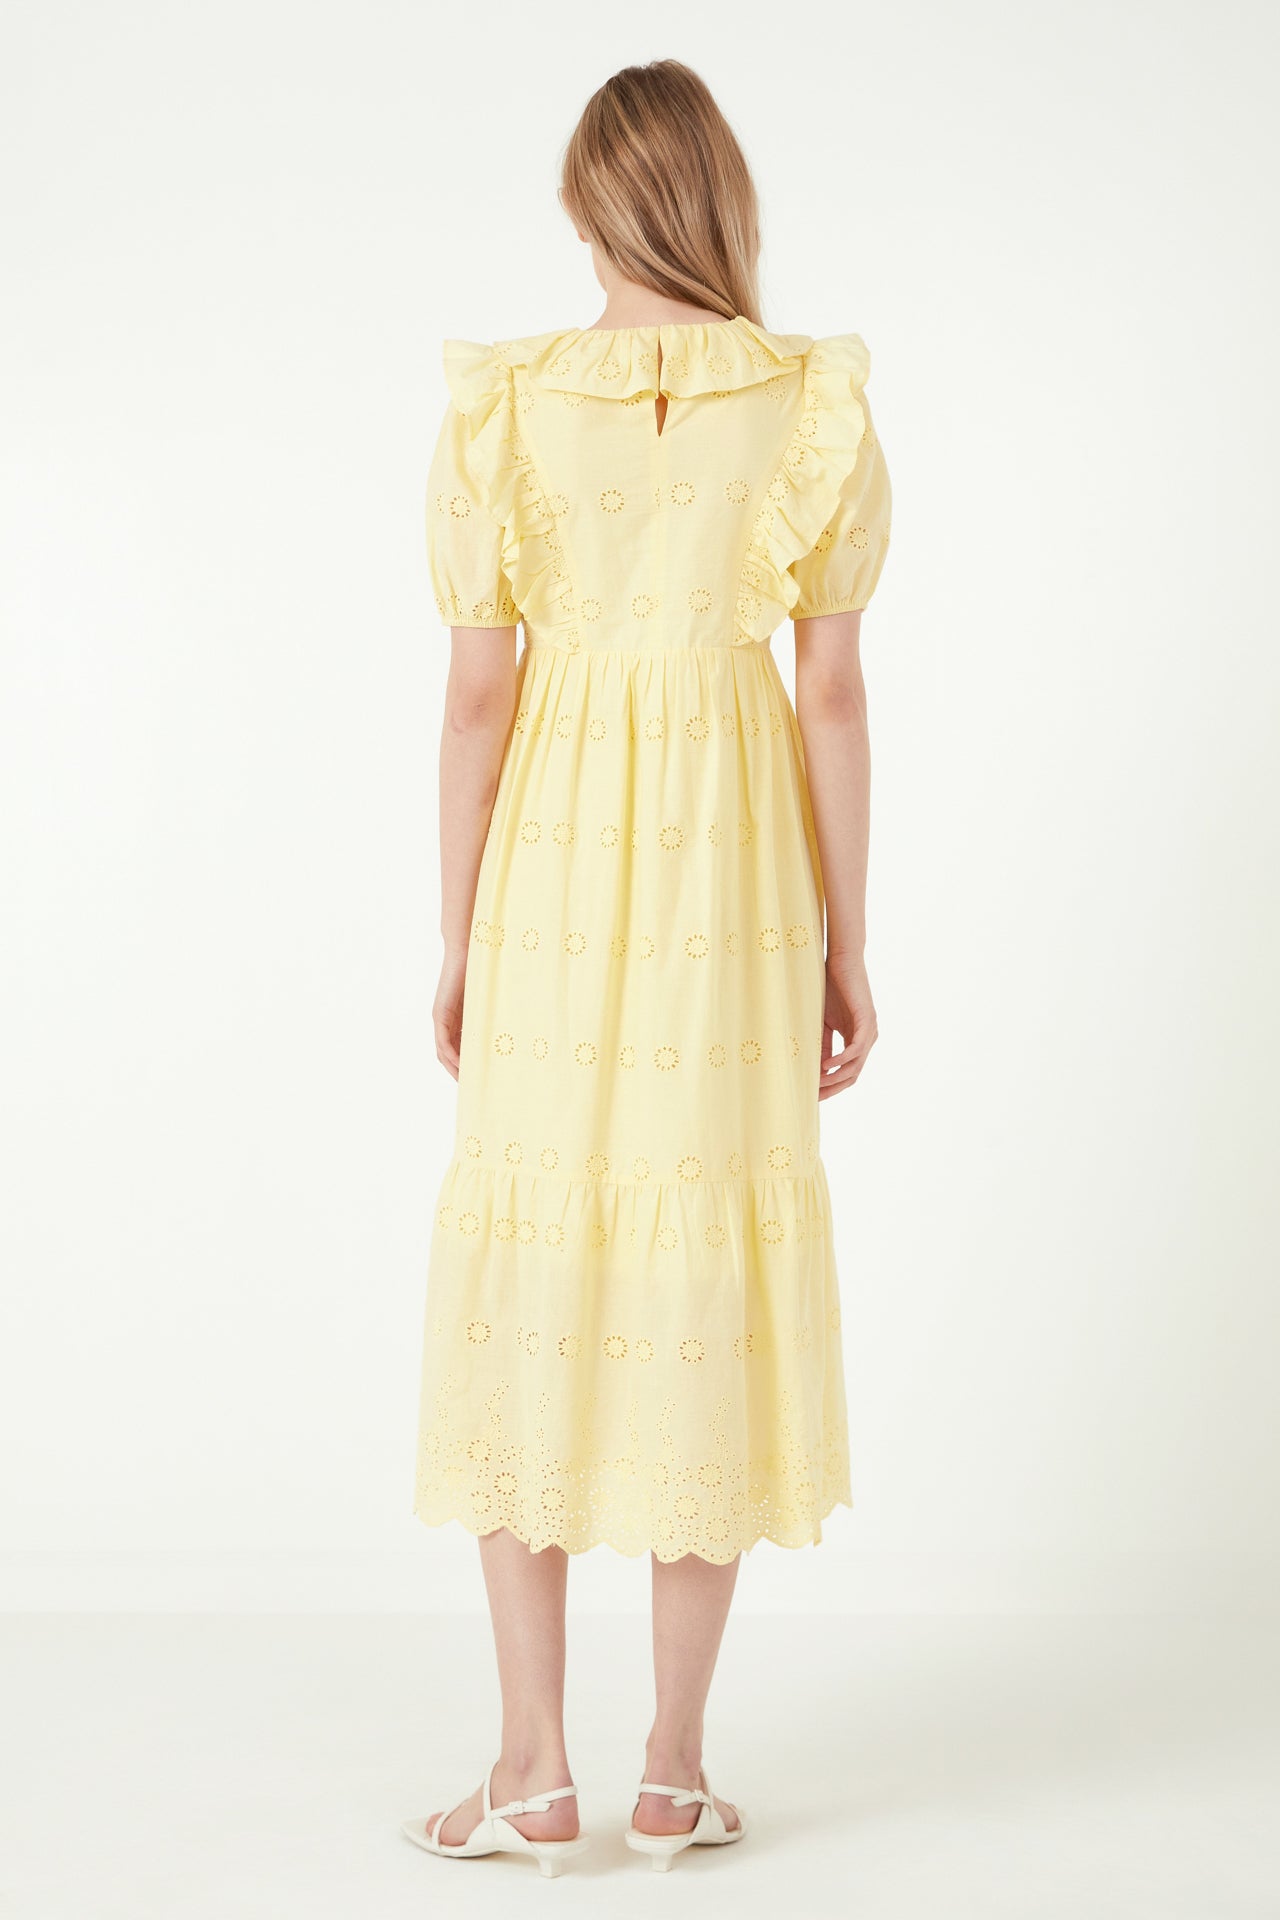 FREE THE ROSES - Eyelet Embroidered Midi Dress - DRESSES available at Objectrare